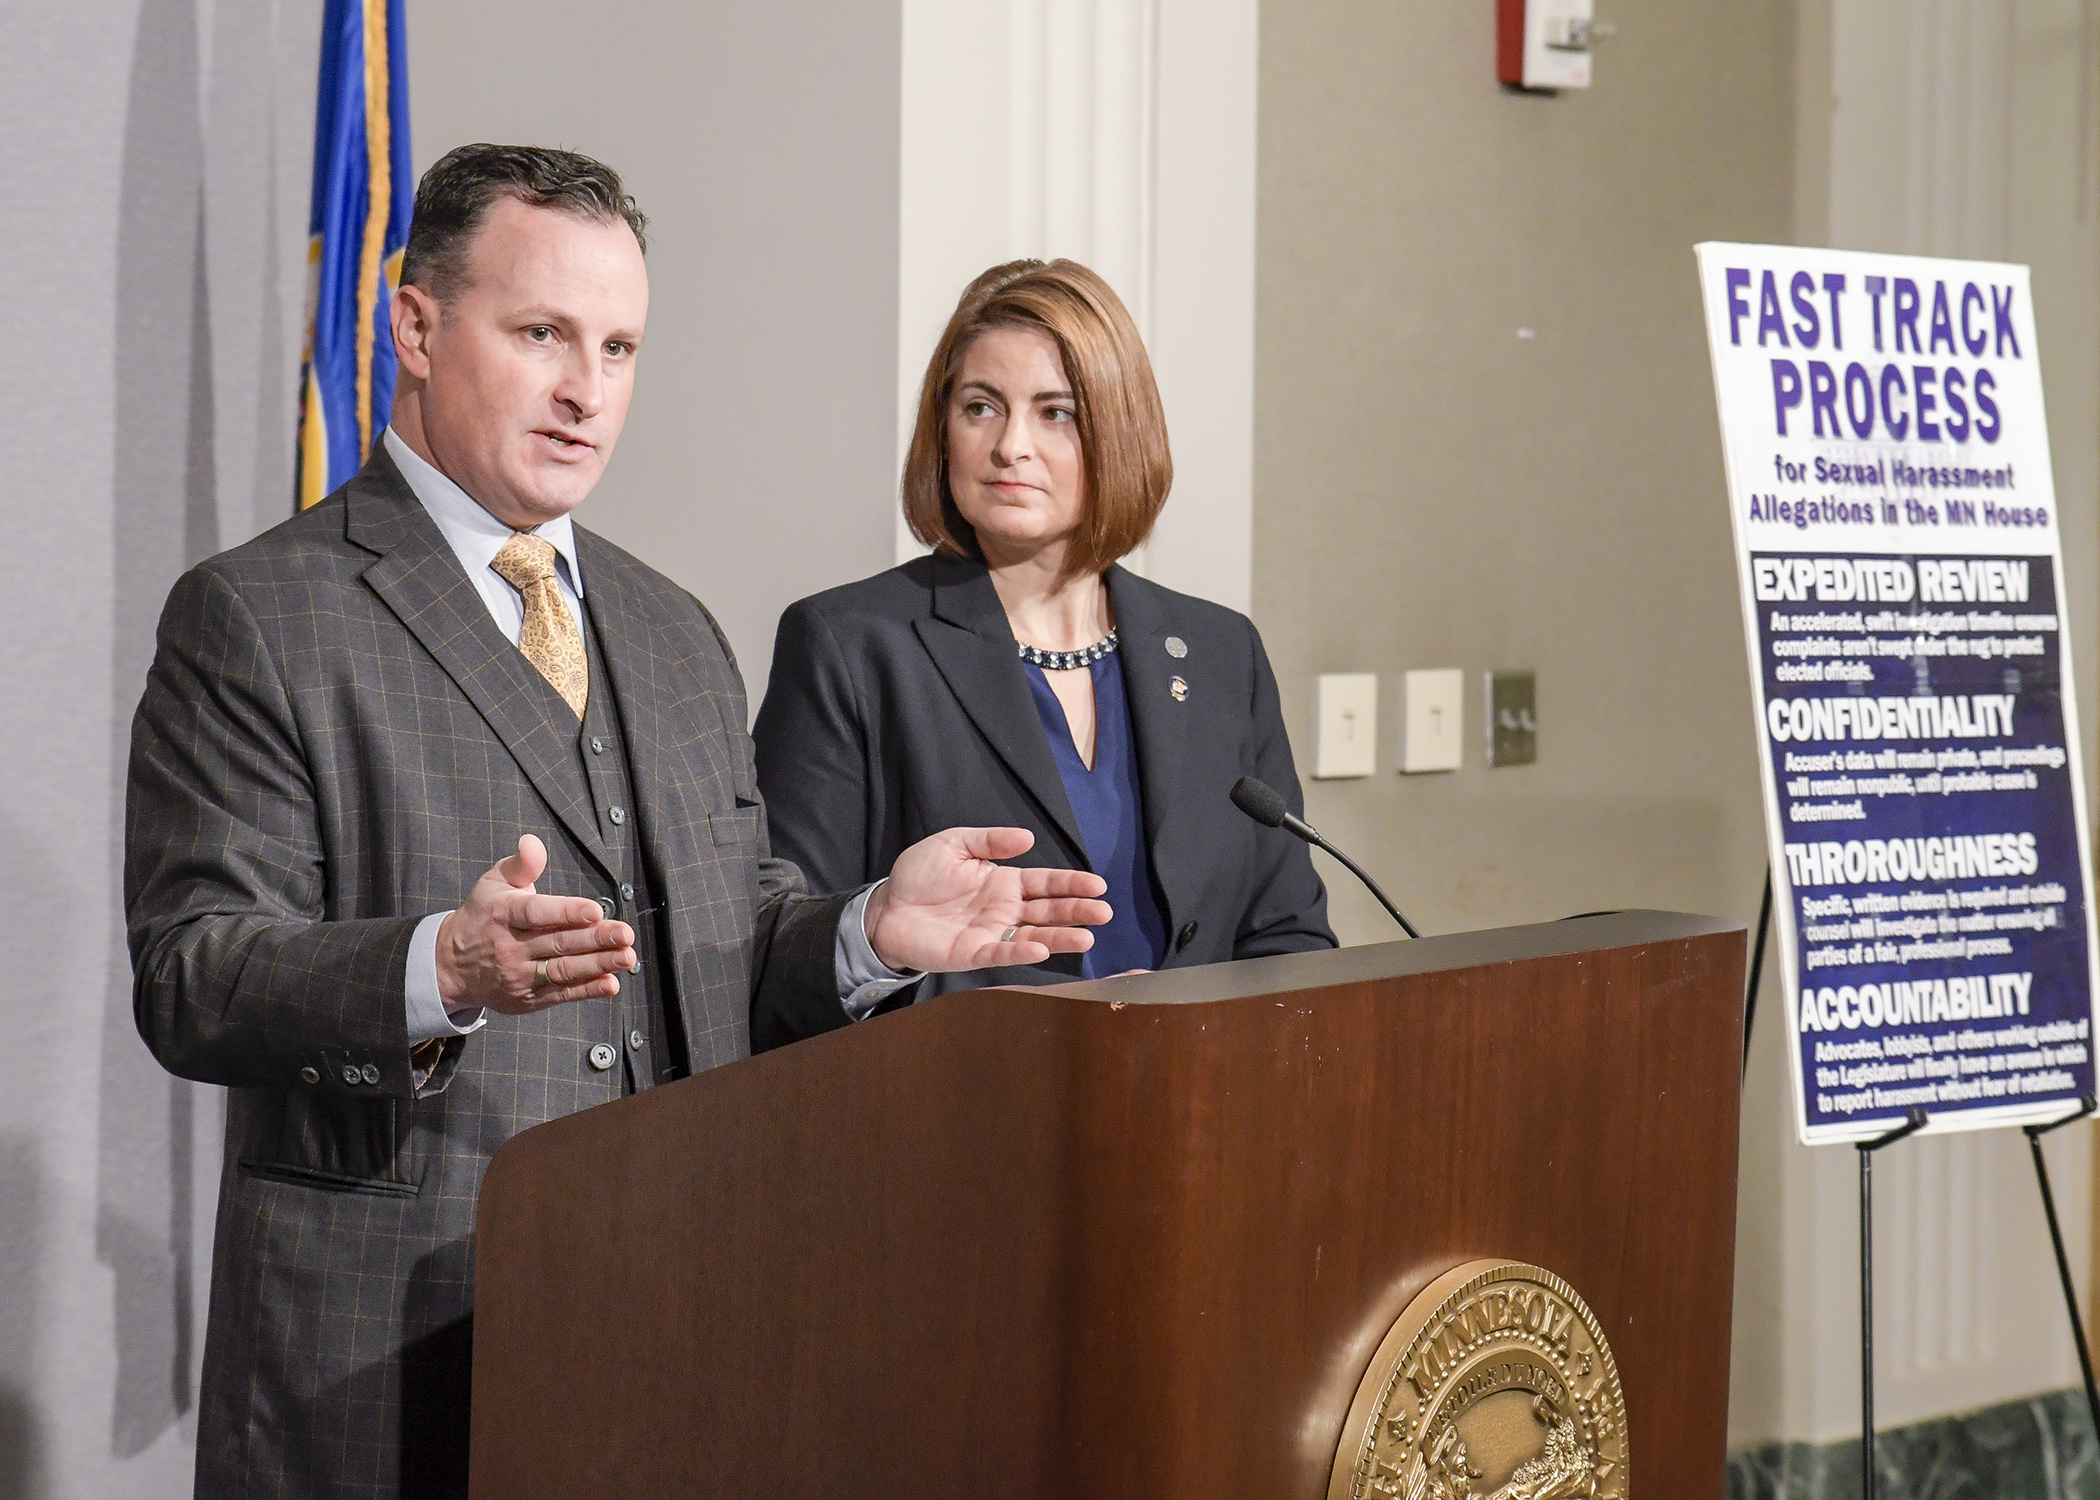 Rep. John Lesch and Rep. Marion O’Neill introduce a series of proposed changes to Minnesota House of Representatives’ rules in the wake of recent reports of sexual harassment in and around the State Capitol. Photo by Andrew VonBank